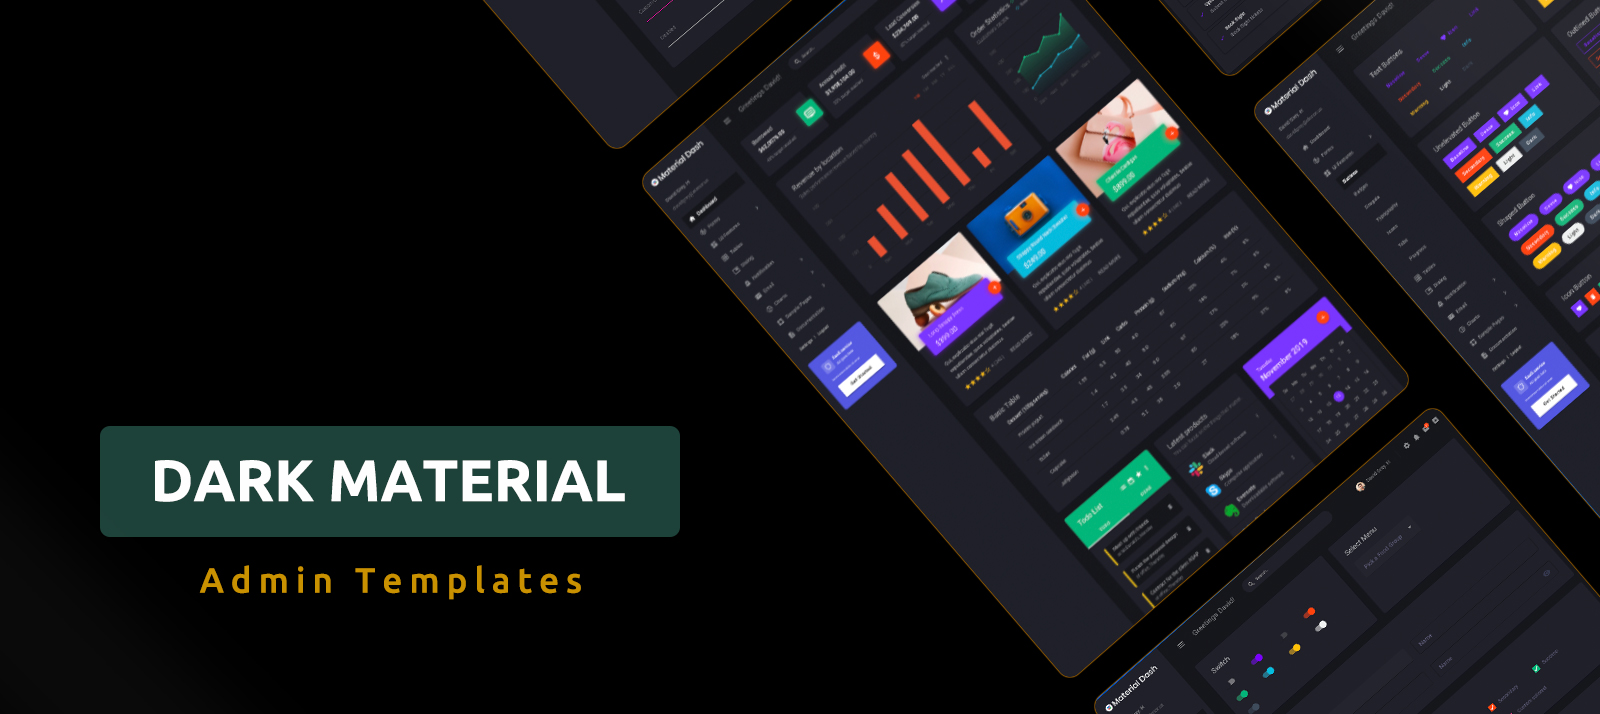  Dark Material Design Admin Templates You Do Not Want To Miss Out in 2020